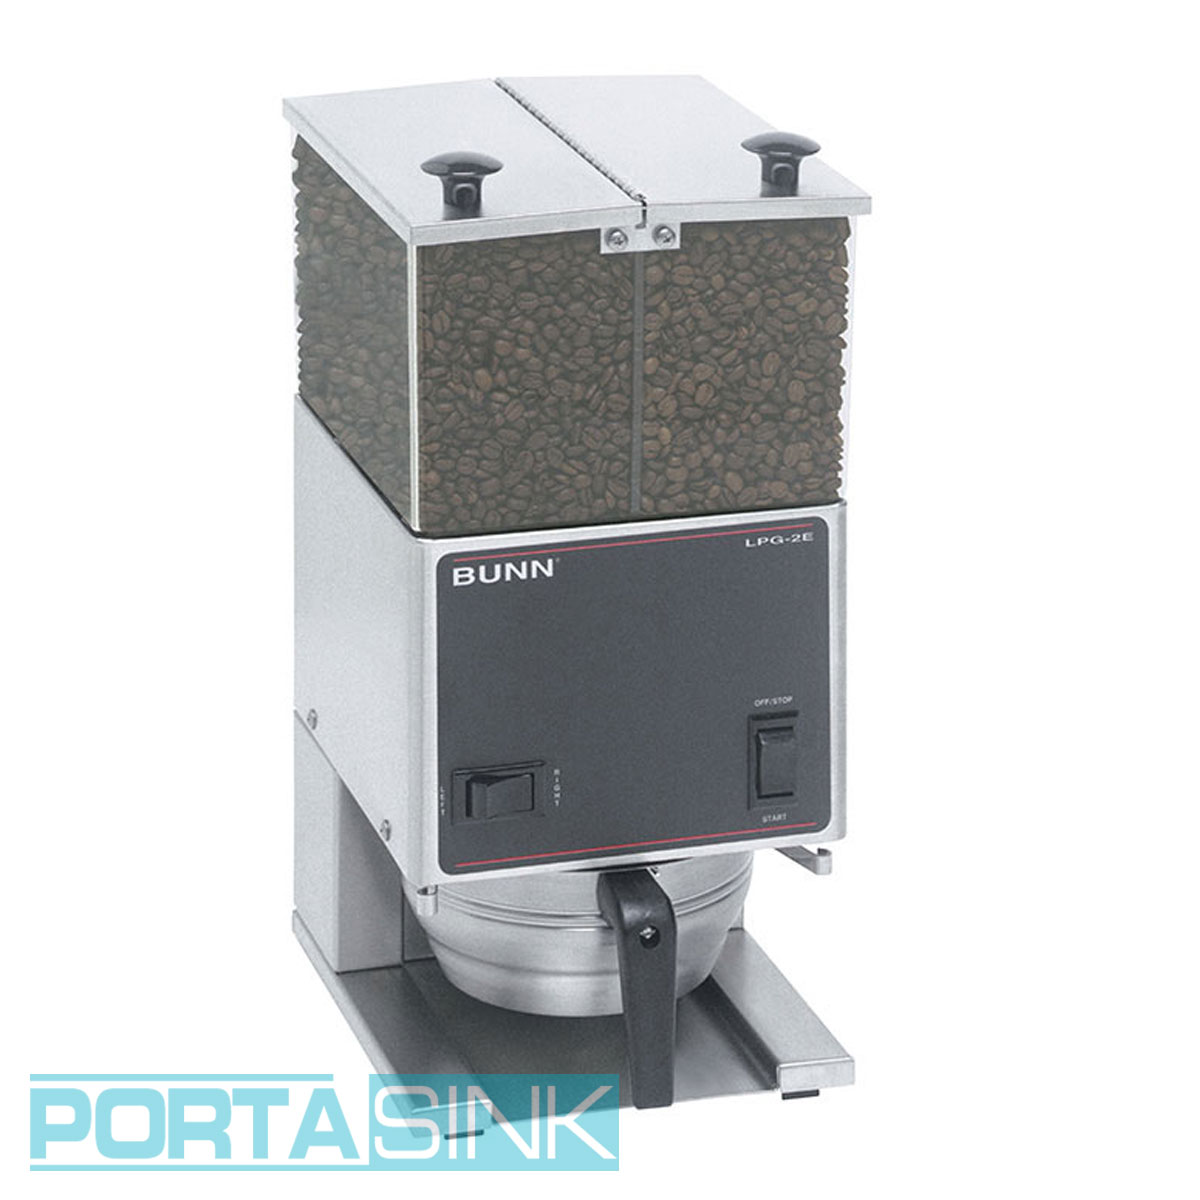 BUNN Coffee Grinder, Low Profile 2 Hoppers